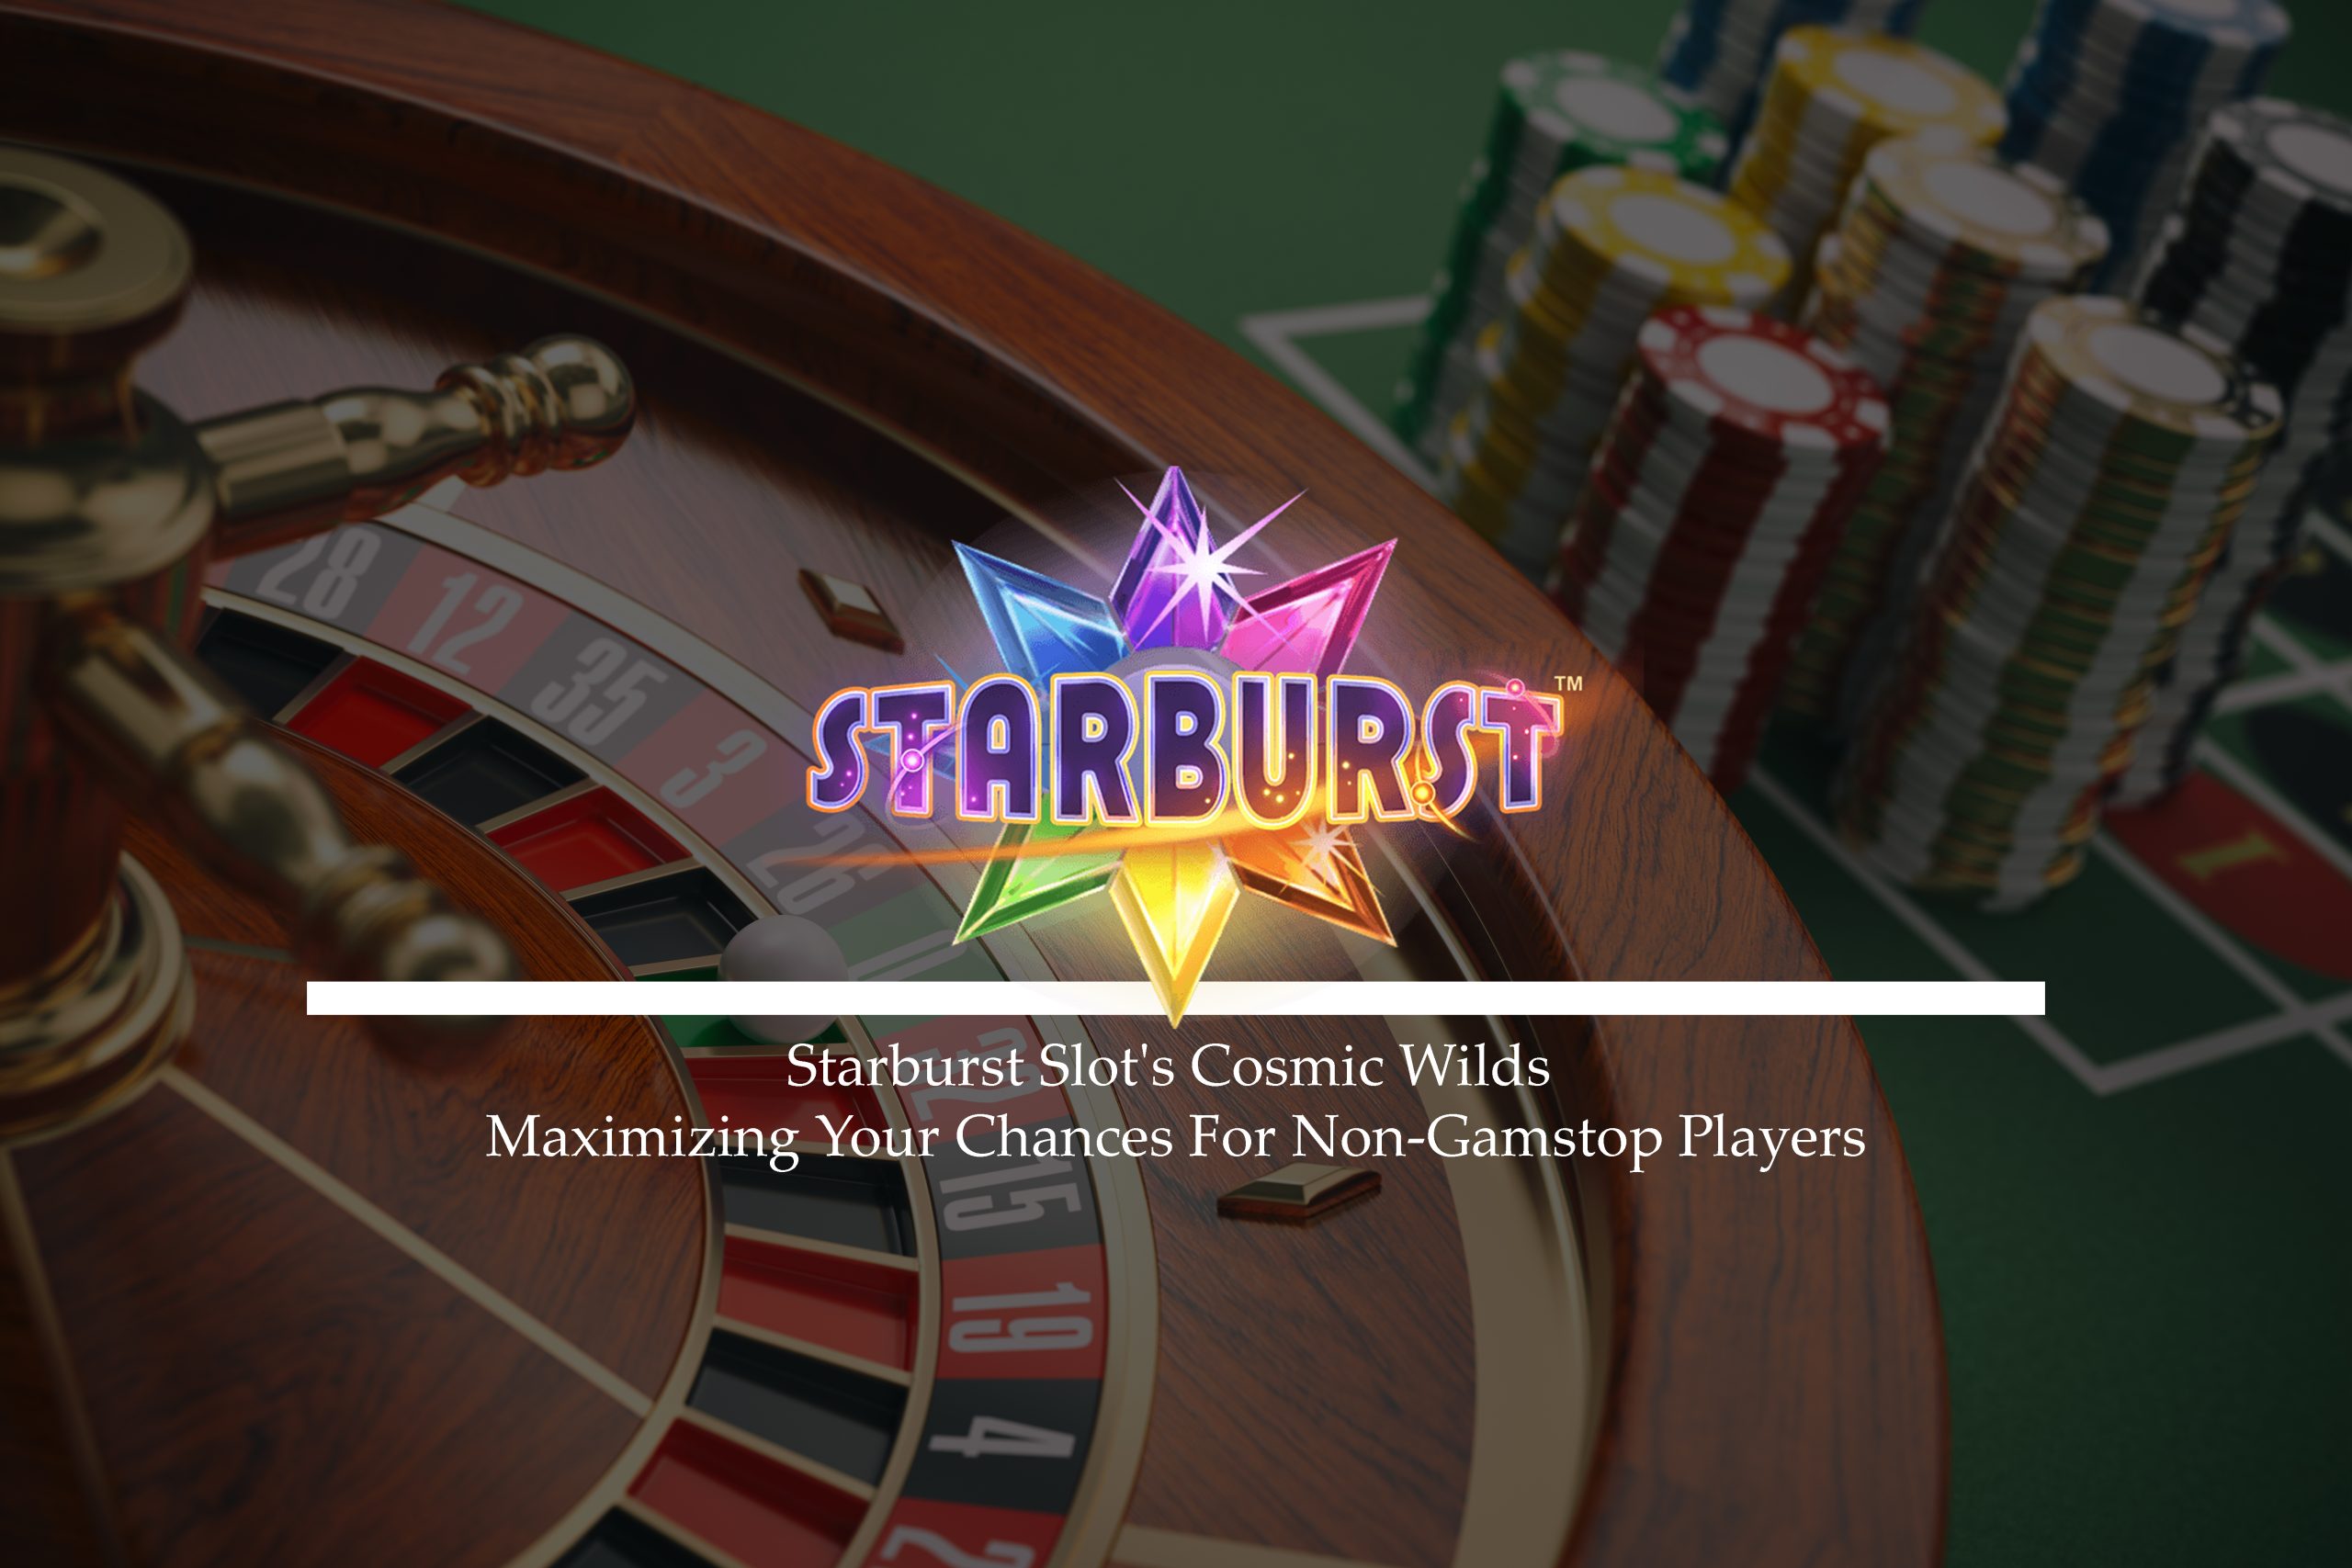 Starburst Slot's Cosmic Wilds: Maximizing Your Chances For Non-Gamstop Players